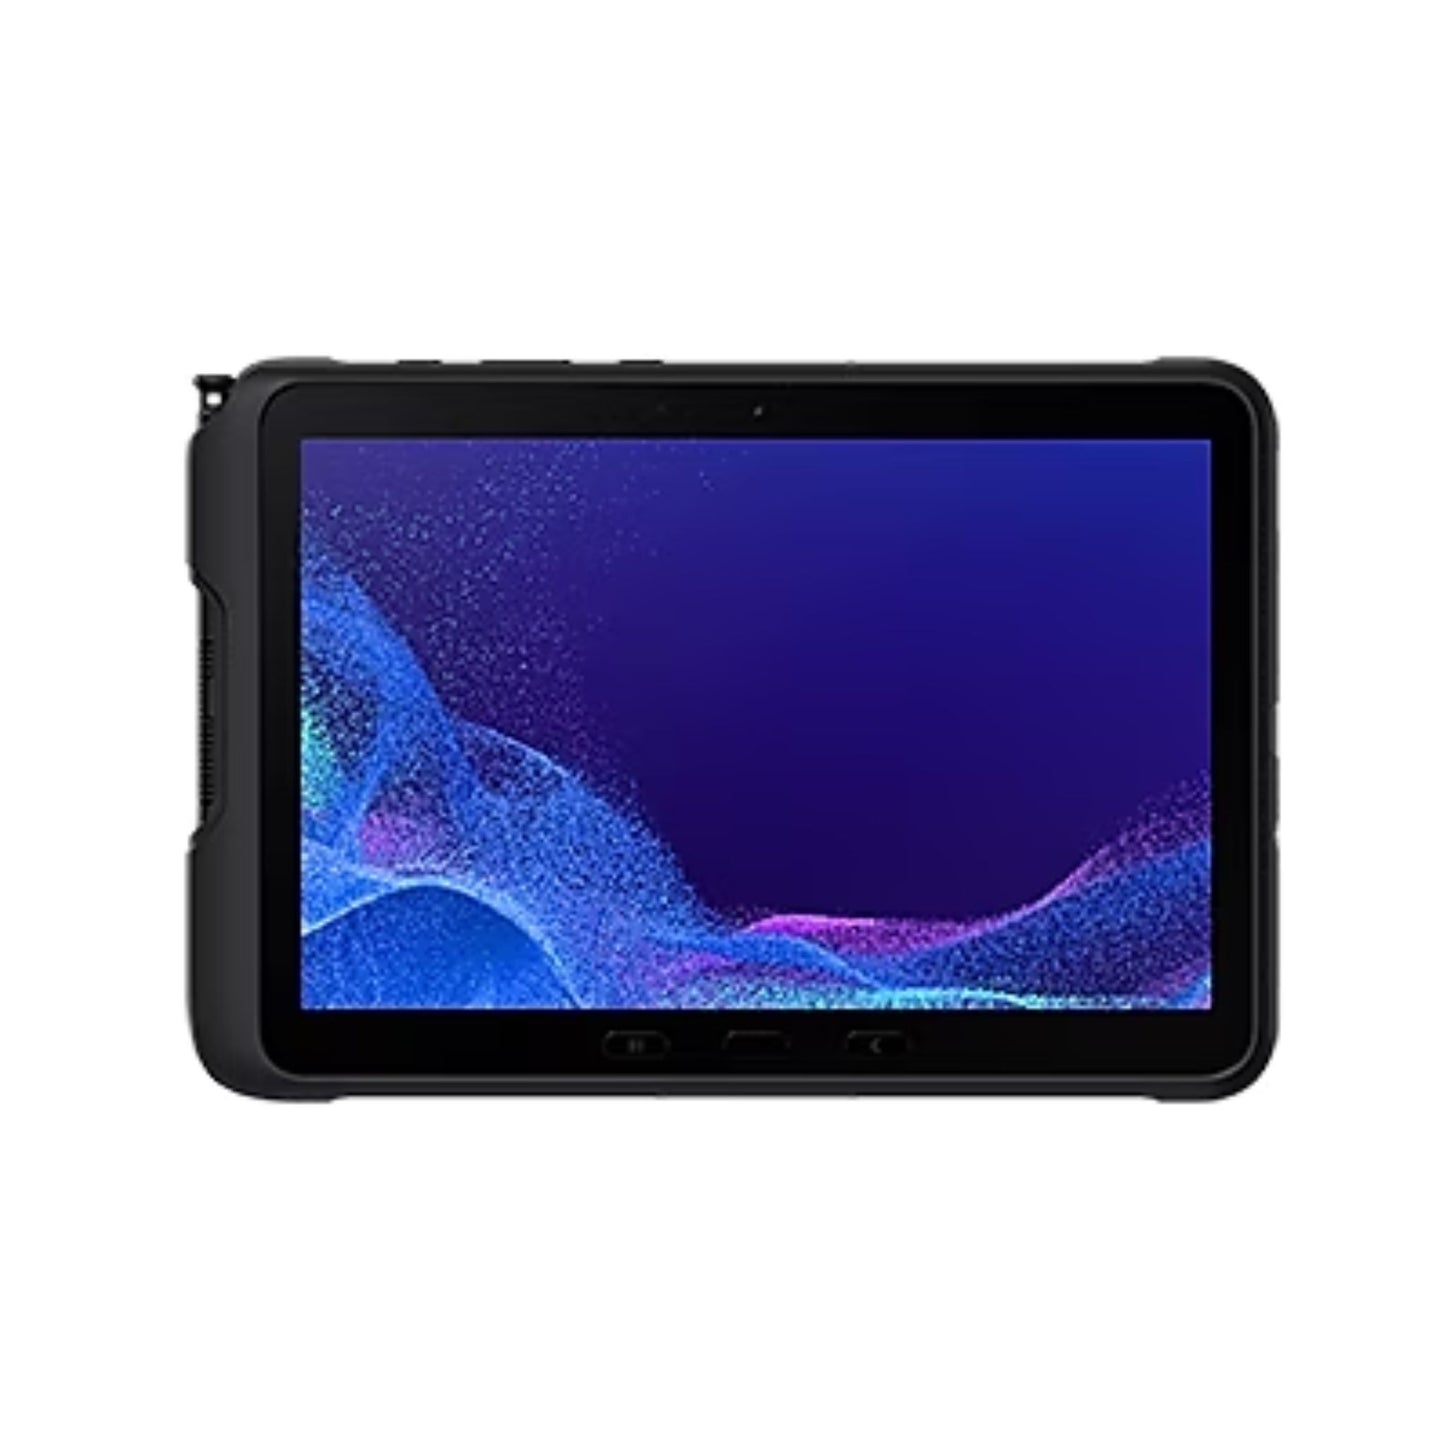 SAMSUNG Galaxy TabActive4 Pro 10.1” 128GB Wi-Fi Android Work Tablet, 6GB RAM, Rugged Design, Sensitive Touchscreen, Long-Battery Life-for Workers, SM-T630UZKEN20, 2022 Model, Black